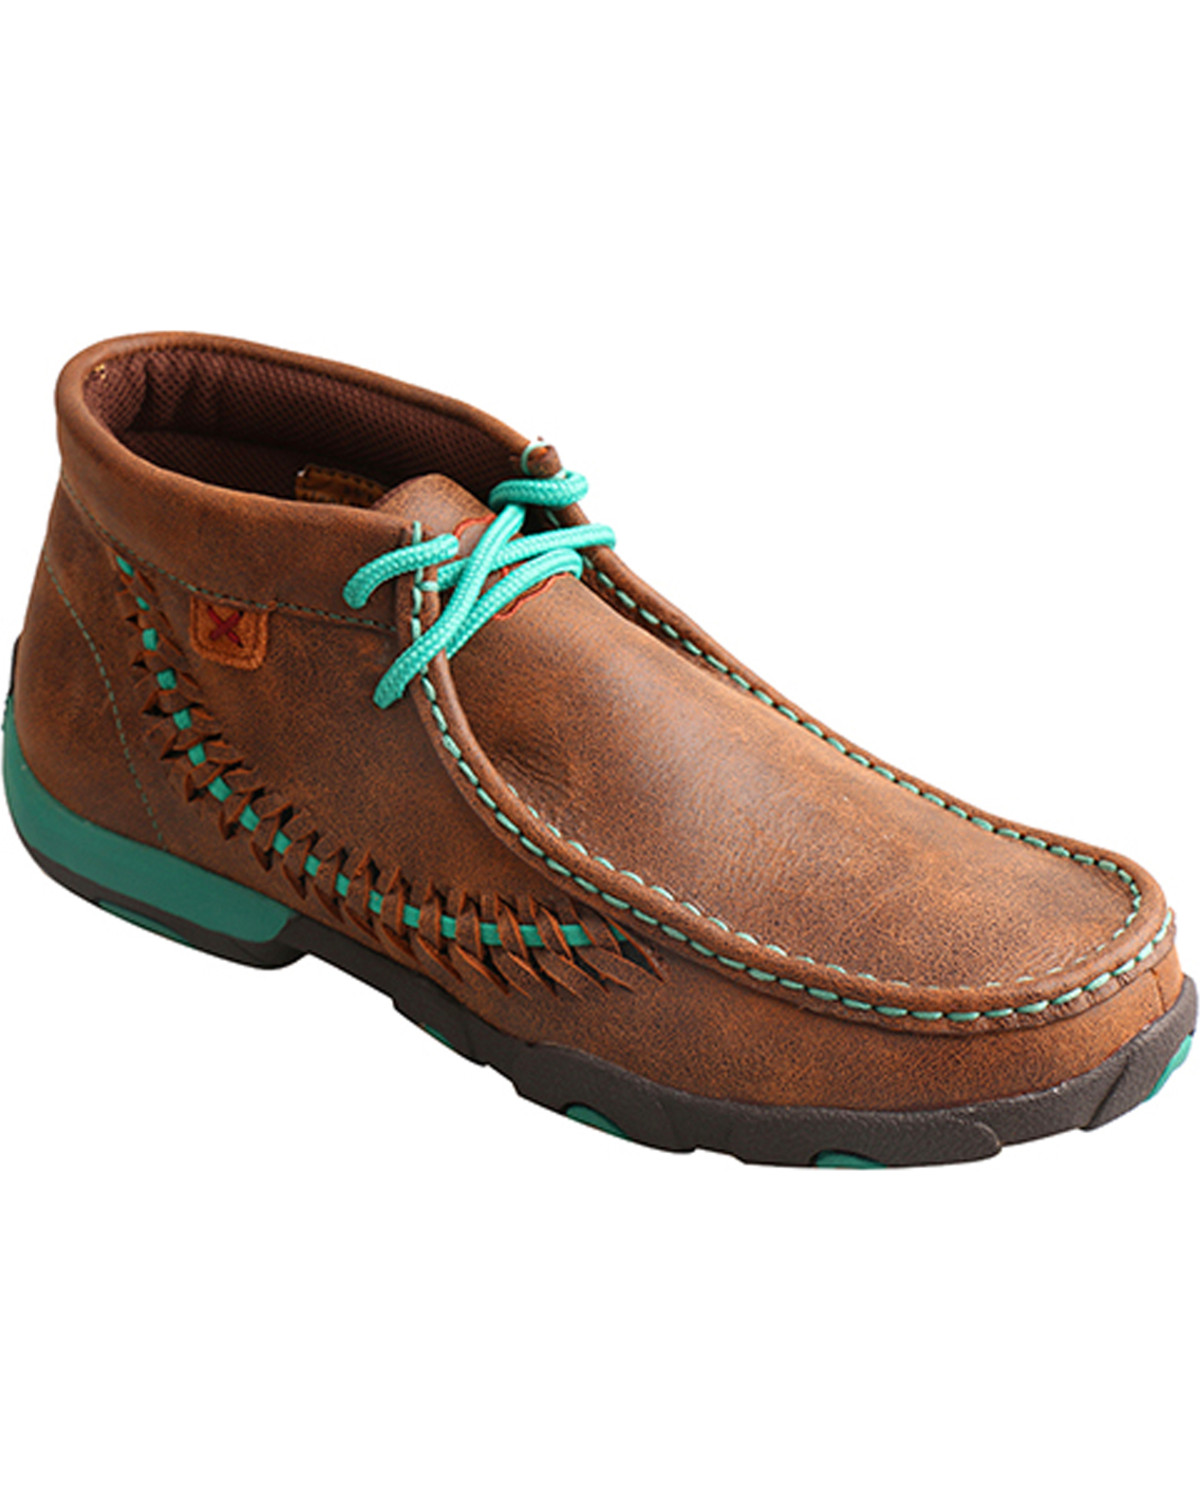 twisted x women's turquoise driving mocs